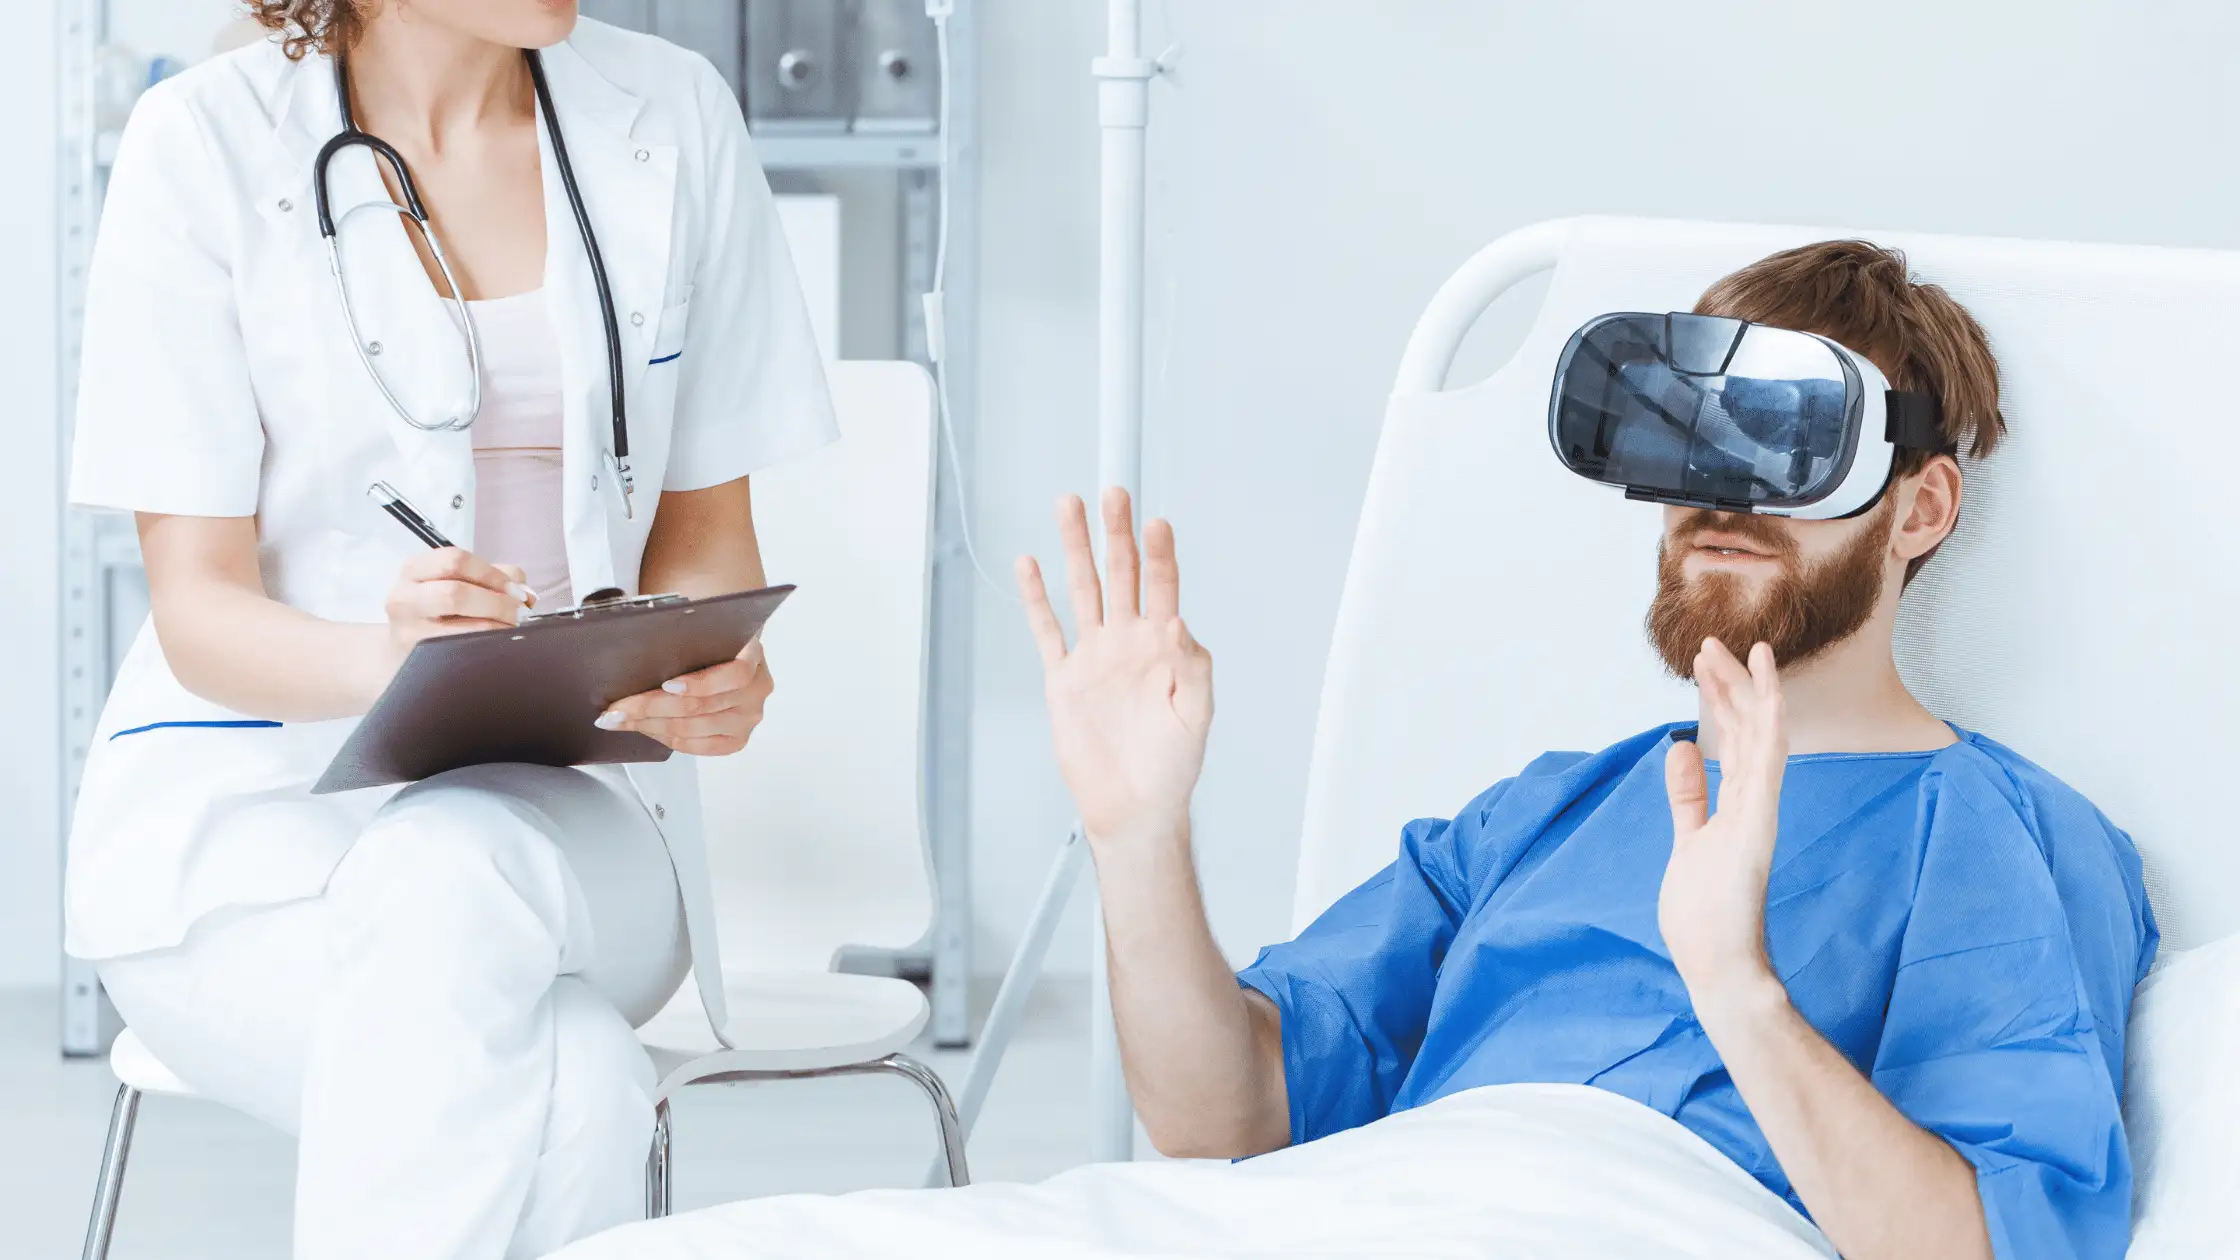 How immersive and interactive technologies bring a paradigm shift in patient care